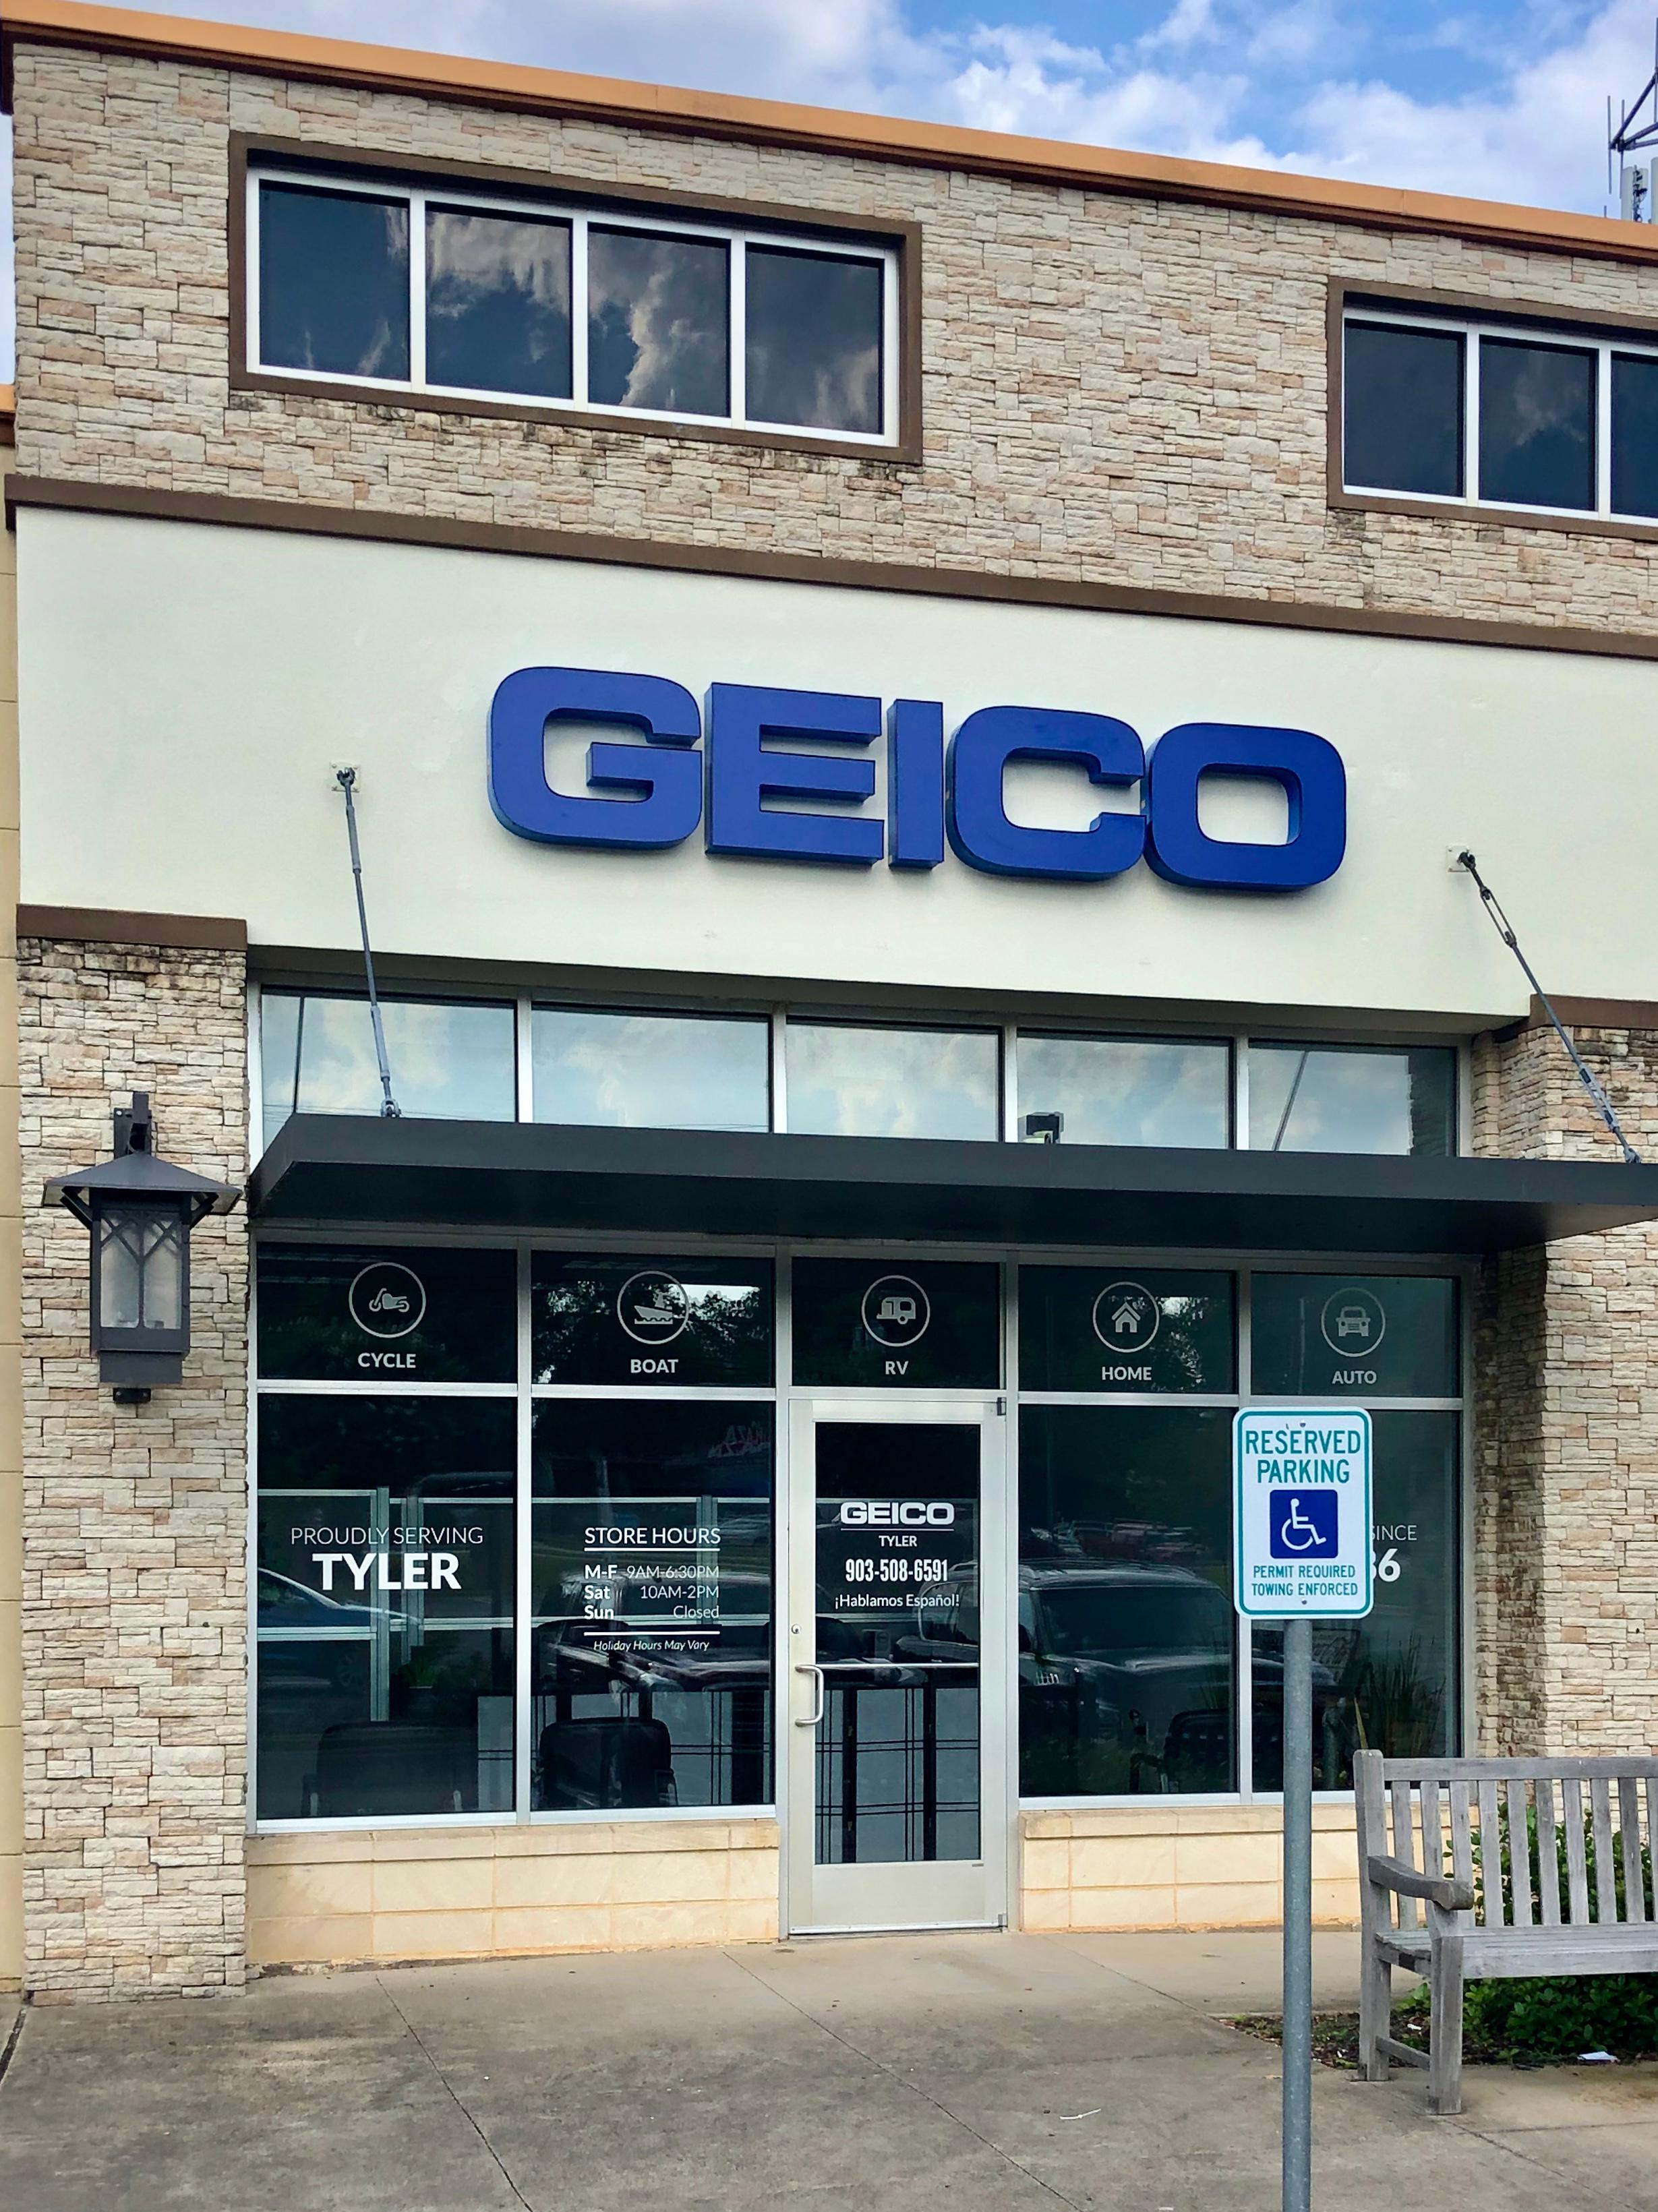 GEICO Insurance Agent 3709 Troup Hwy, Tyler, TX 75703